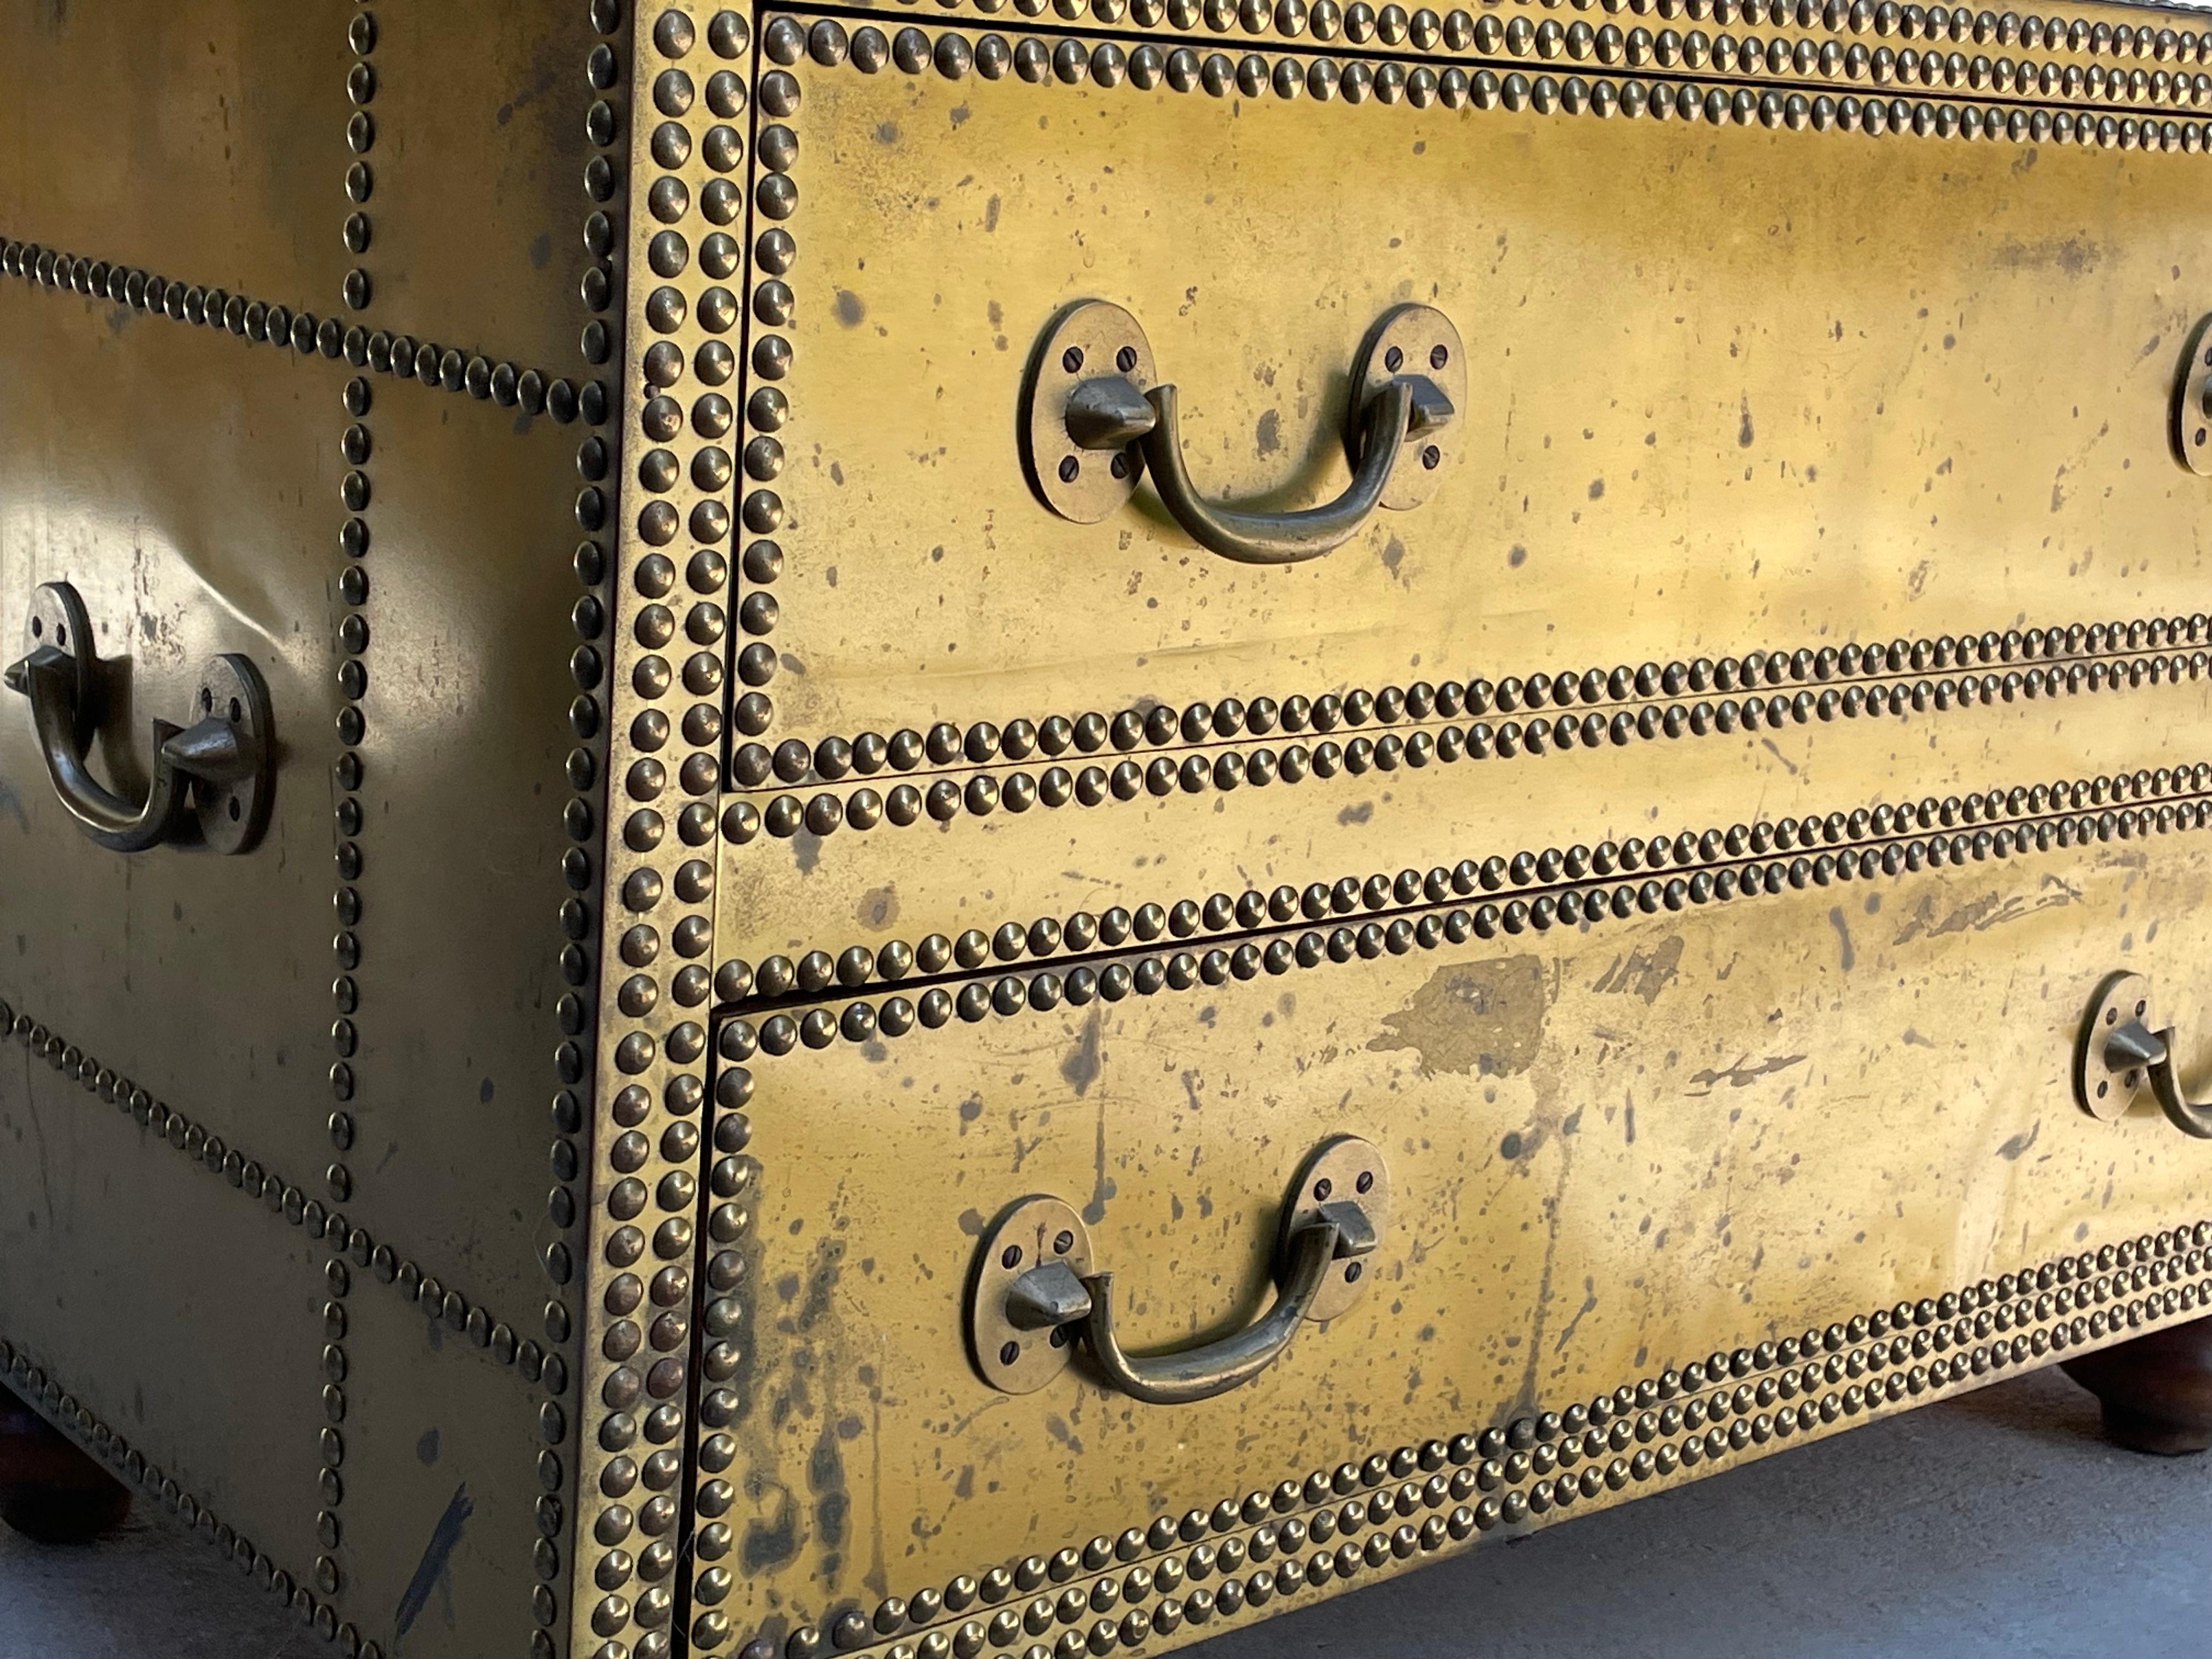 Vintage Sarreid Brass Cocktail Table Chest of Drawers, circa 1970s For Sale 1